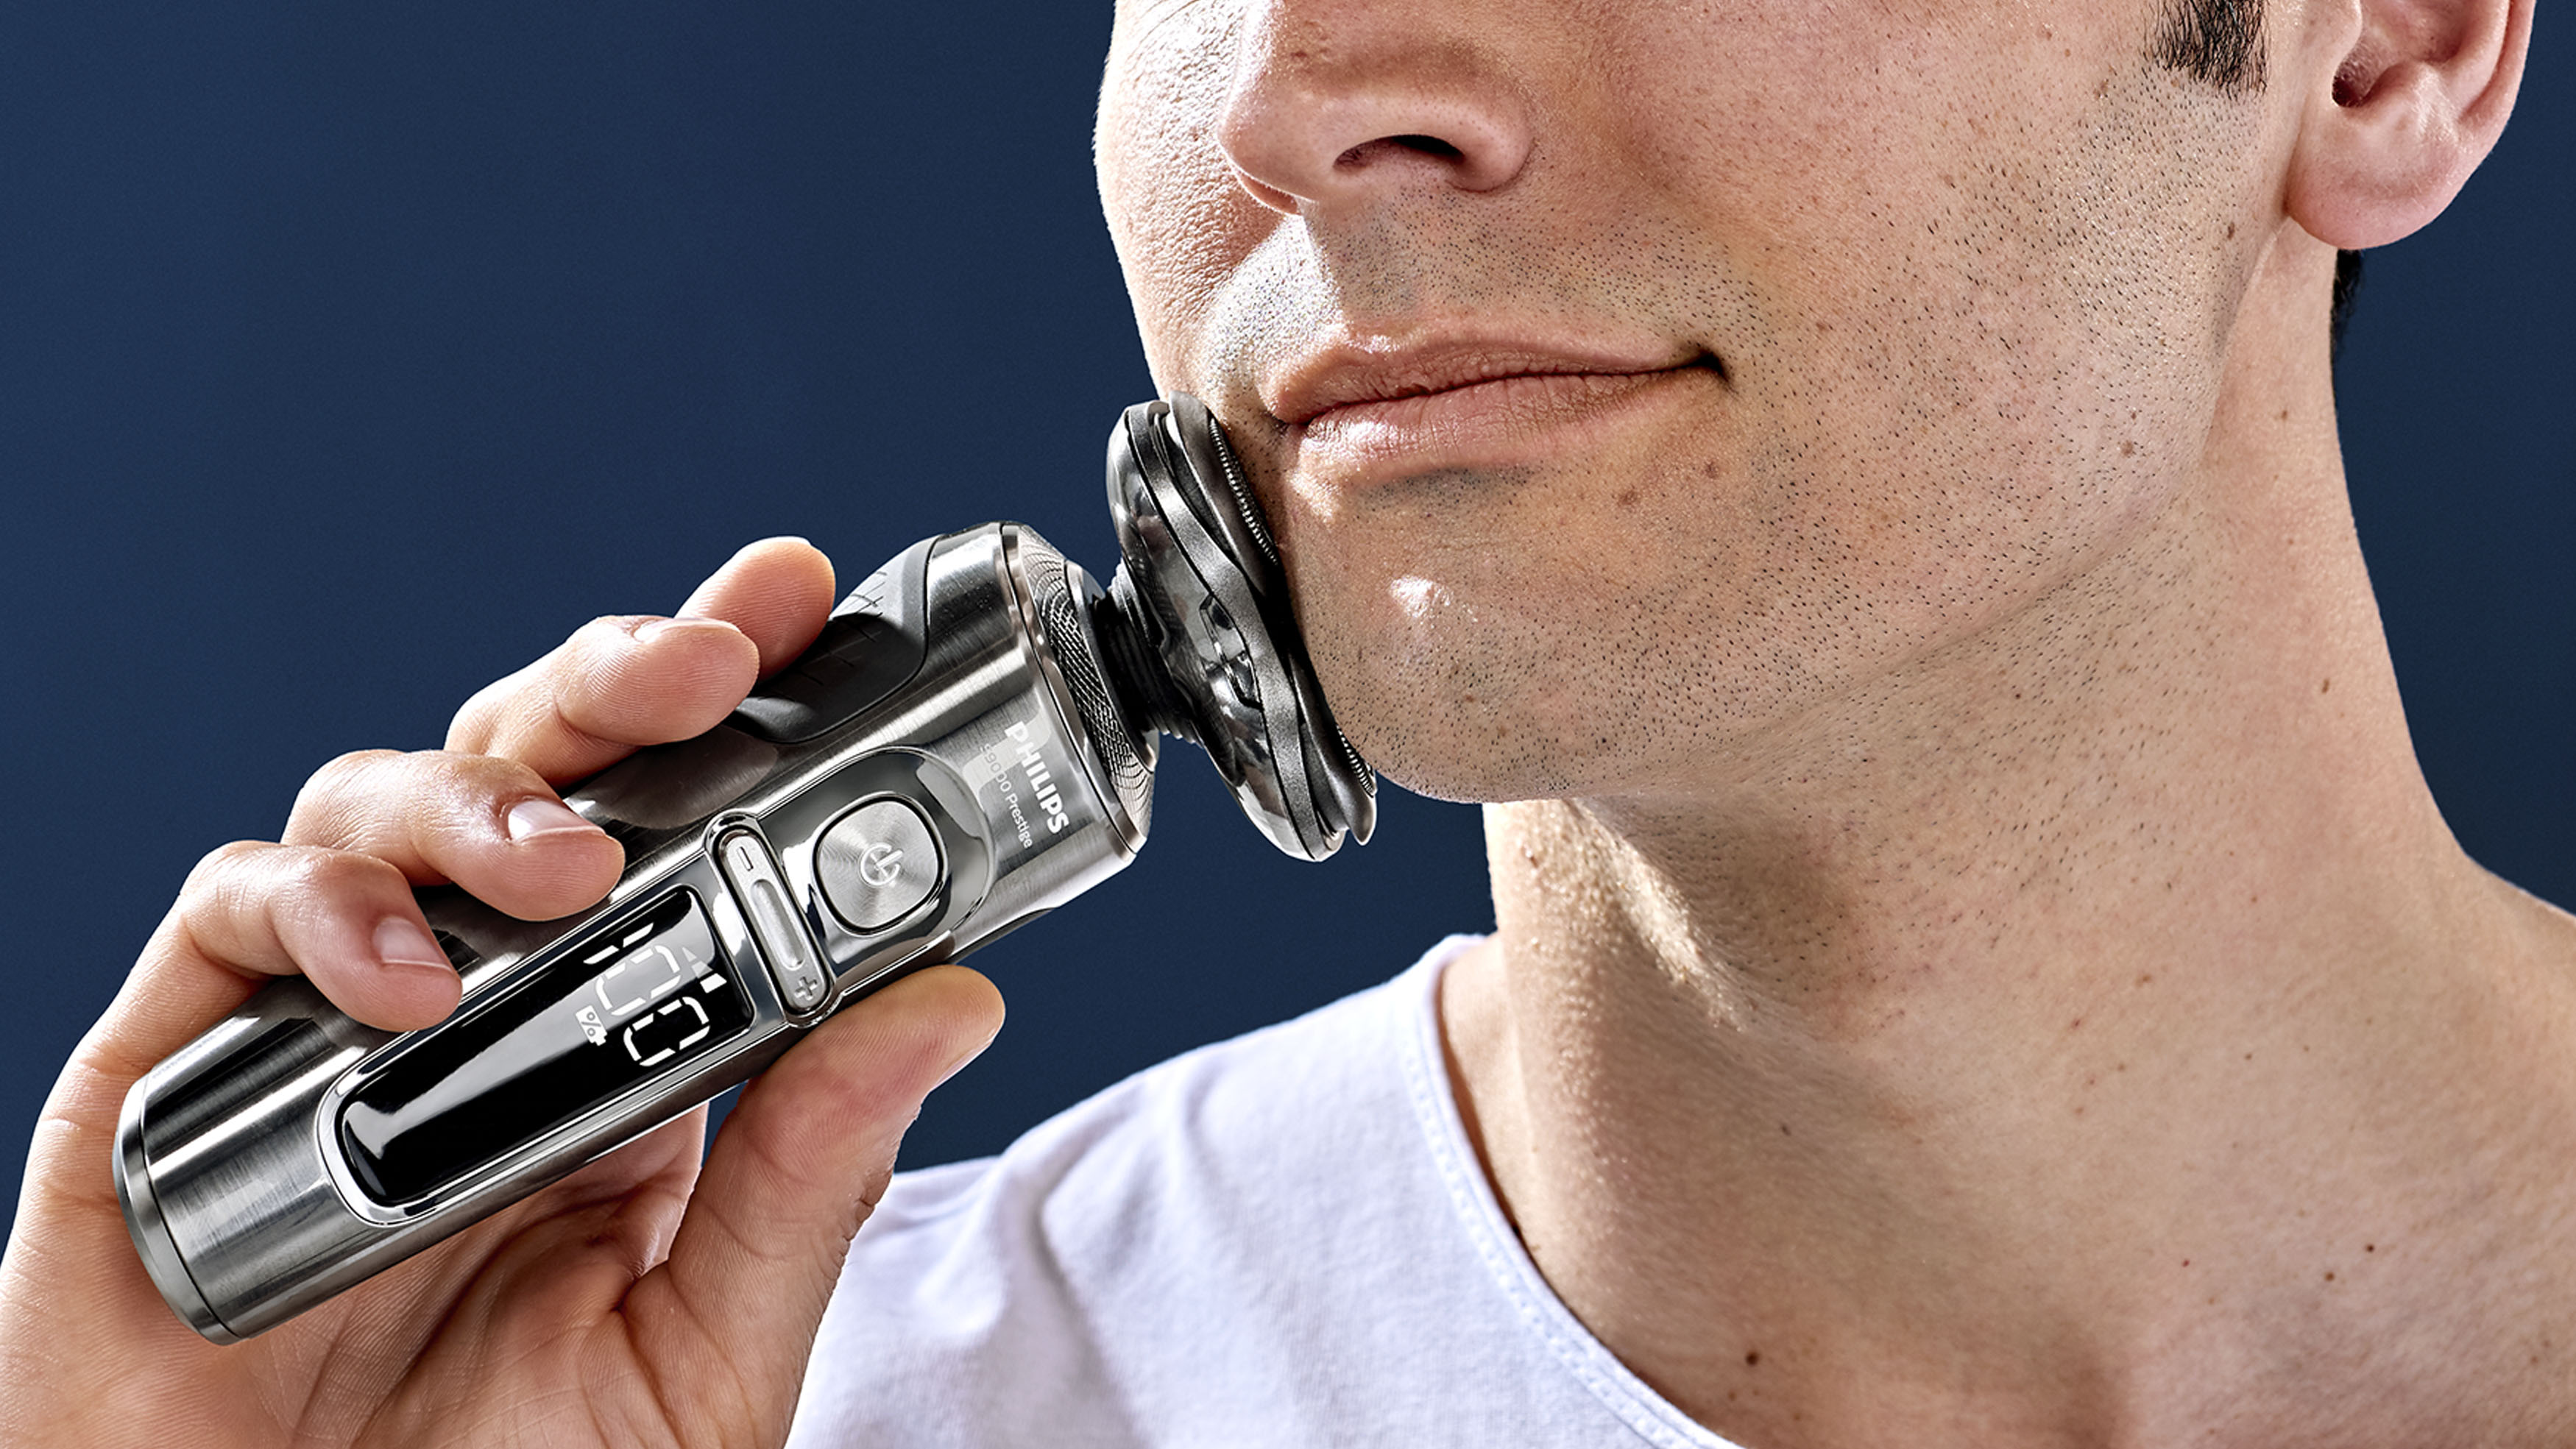 Philips Norelco 9000 (9700) Review - The Close Shave Monster